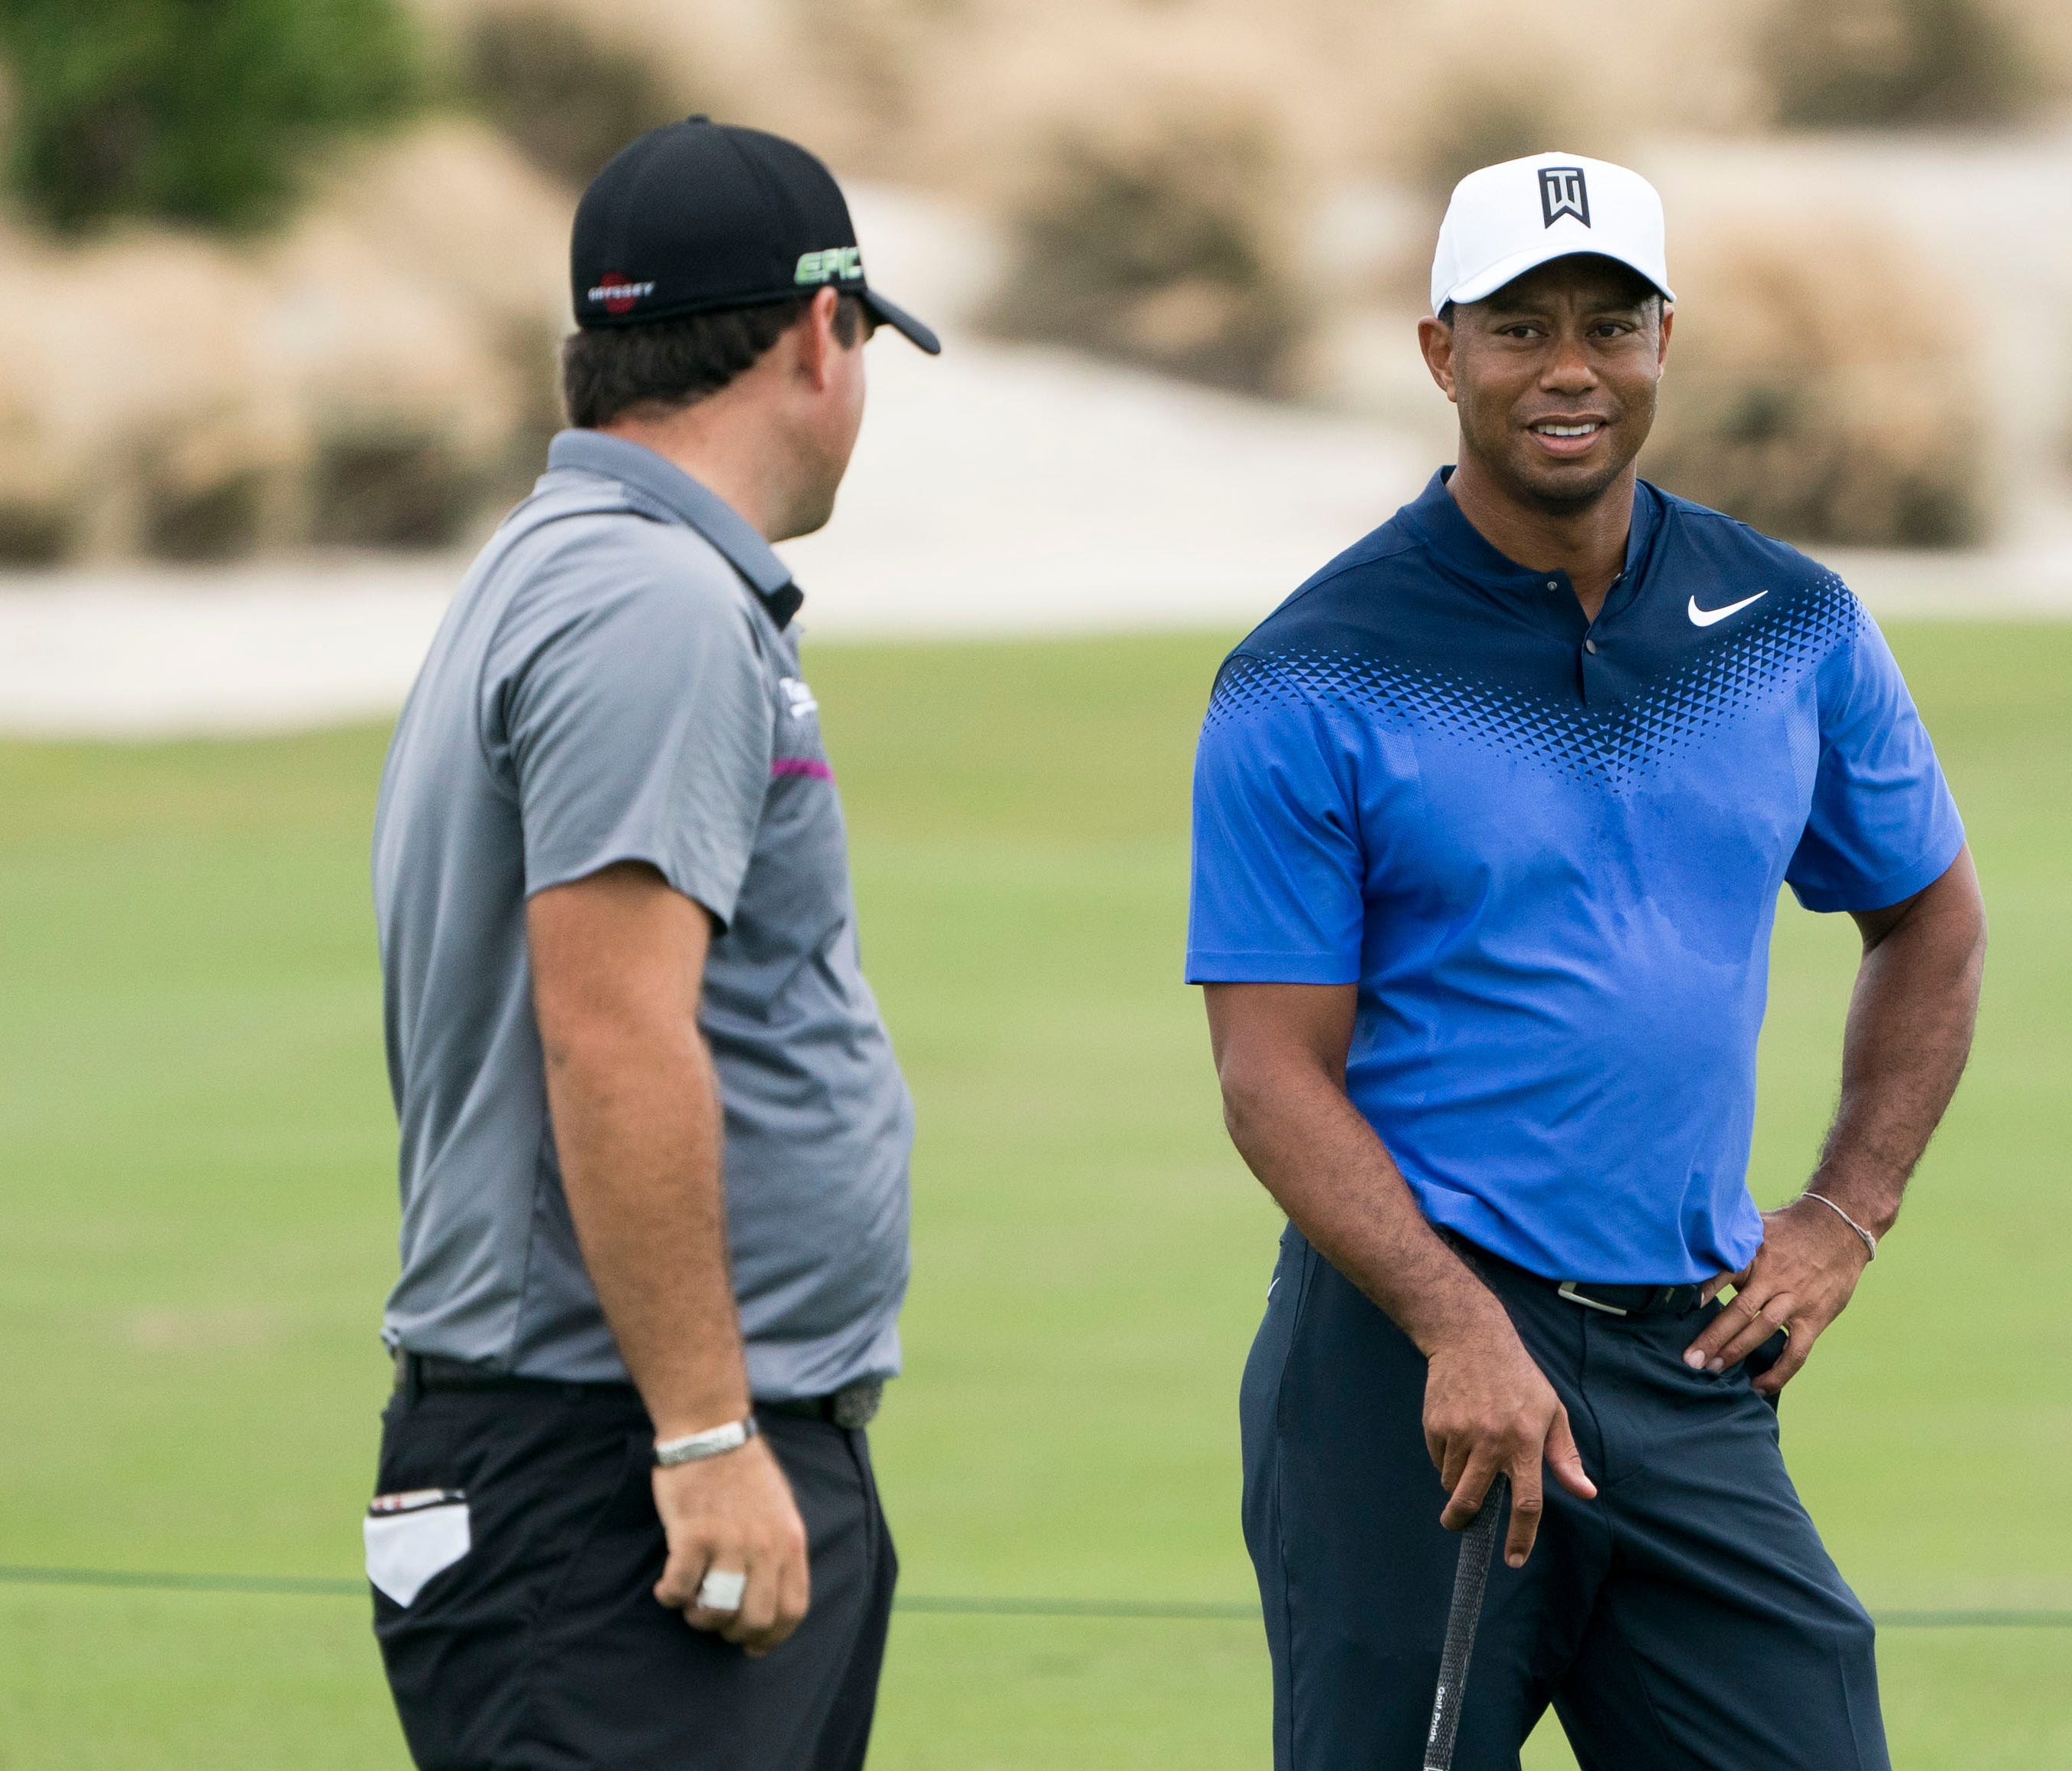 Tiger Woods (right) talks to Patrick Reed (left) on the fourth hole during Monday's practice round of the Hero World Challenge golf tournament at Albany in the Bahamas on Nov. 27.